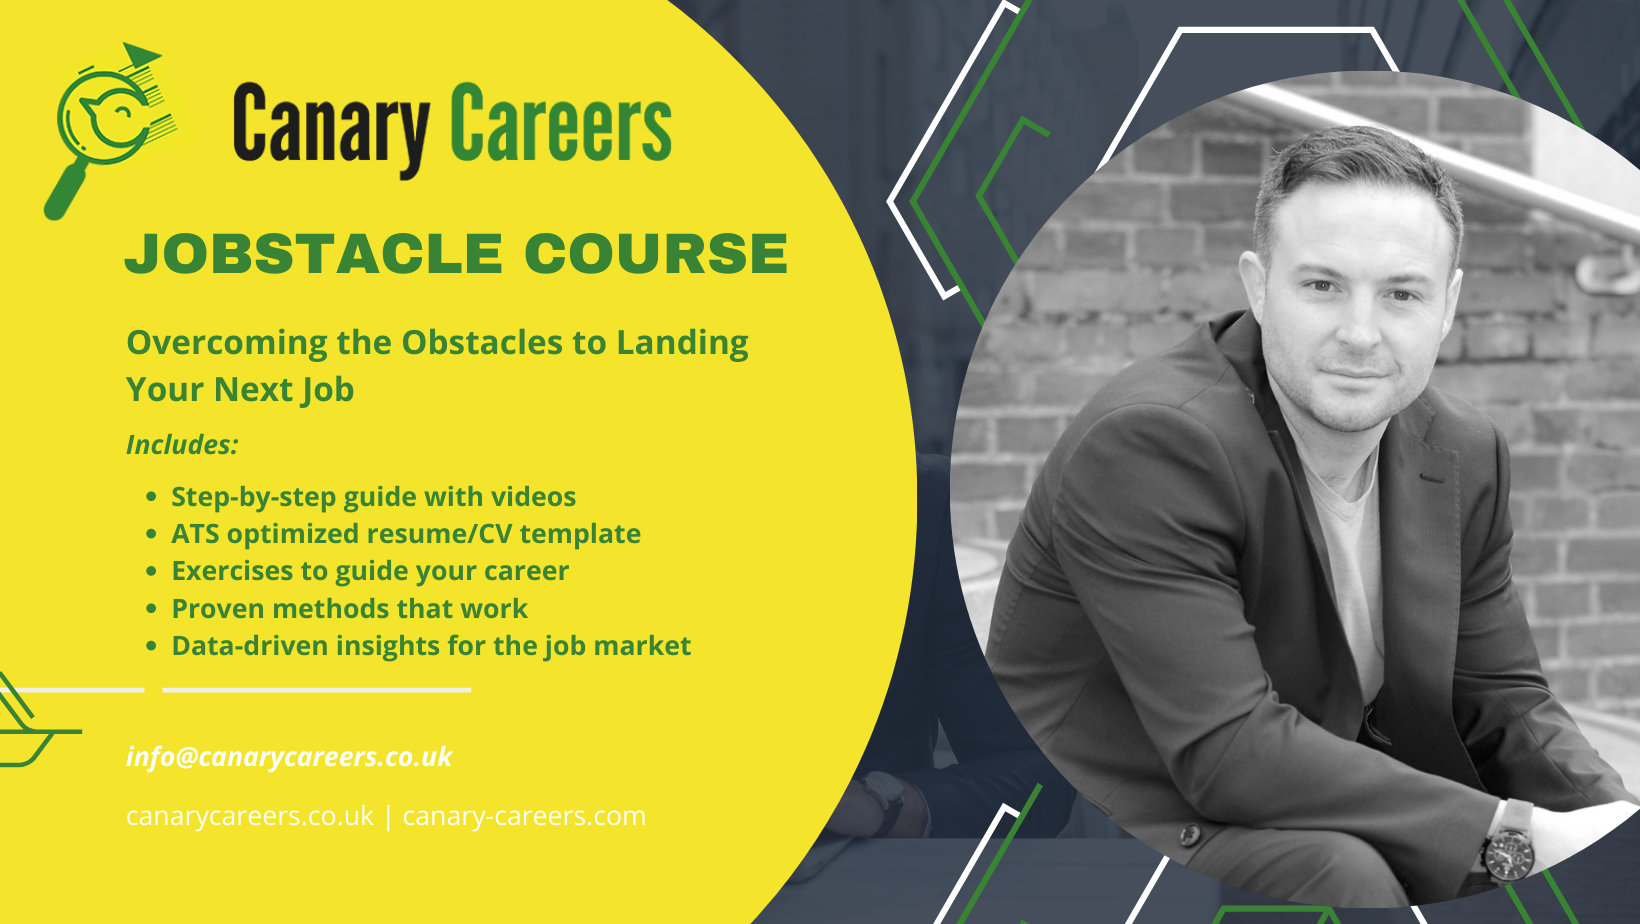 Jobstacle Course: Overcoming the Obstacles to Landing Your Next Job
